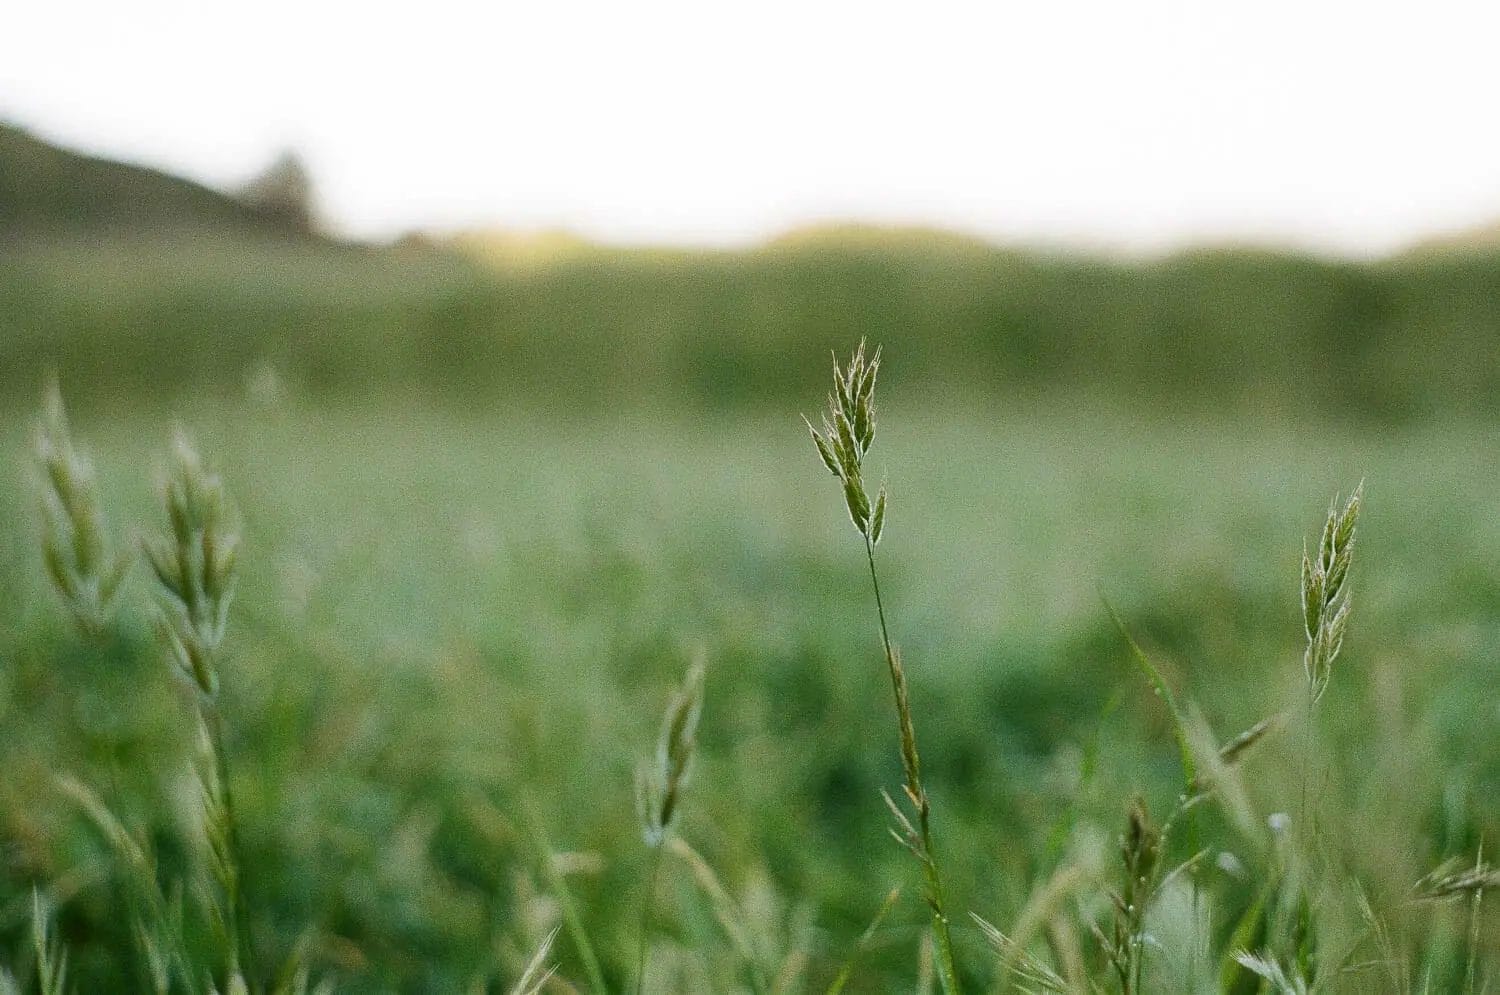 Close-up of grass blades with a softly focused natural background at dusk.